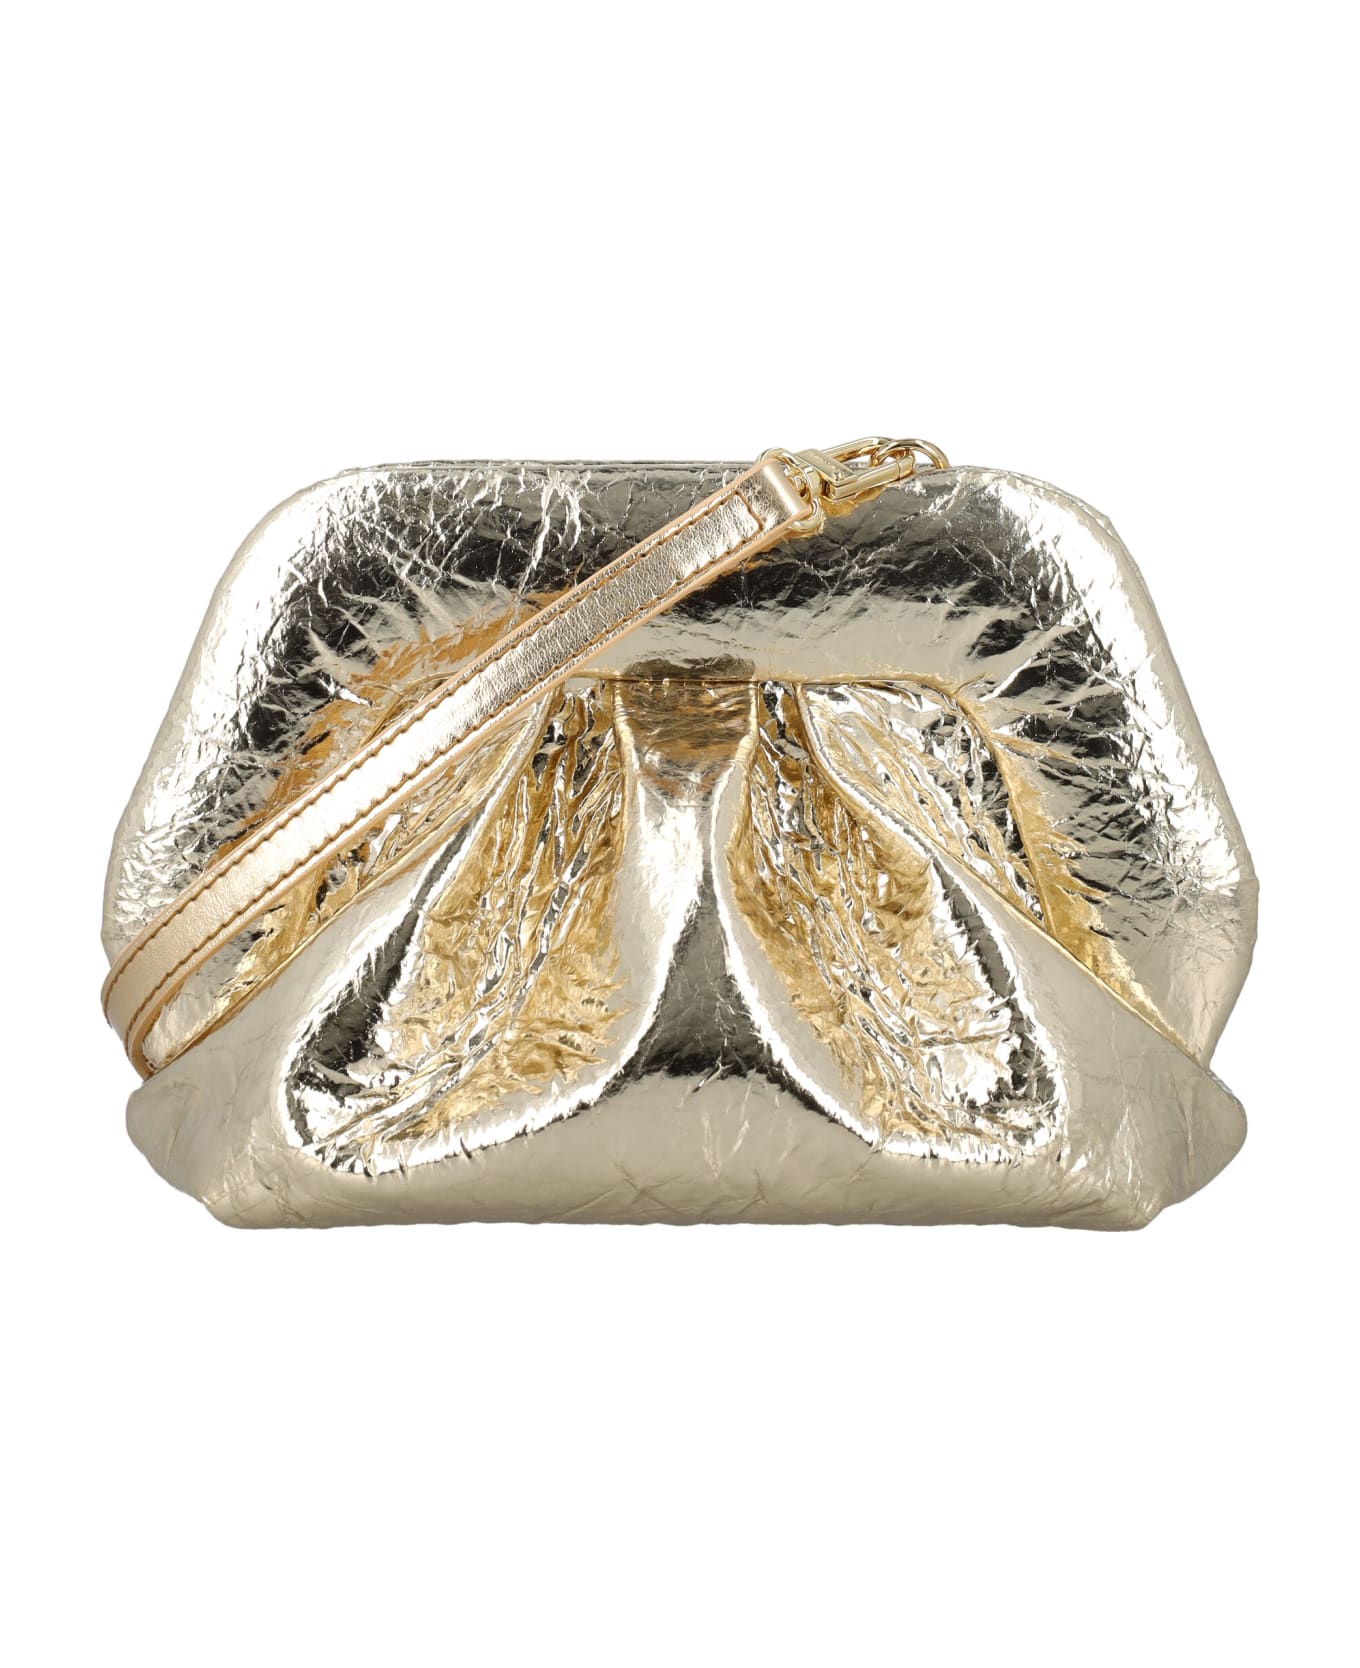 THEMOIRè Gea Clutch Pineapple Leather - GOLD クラッチバッグ